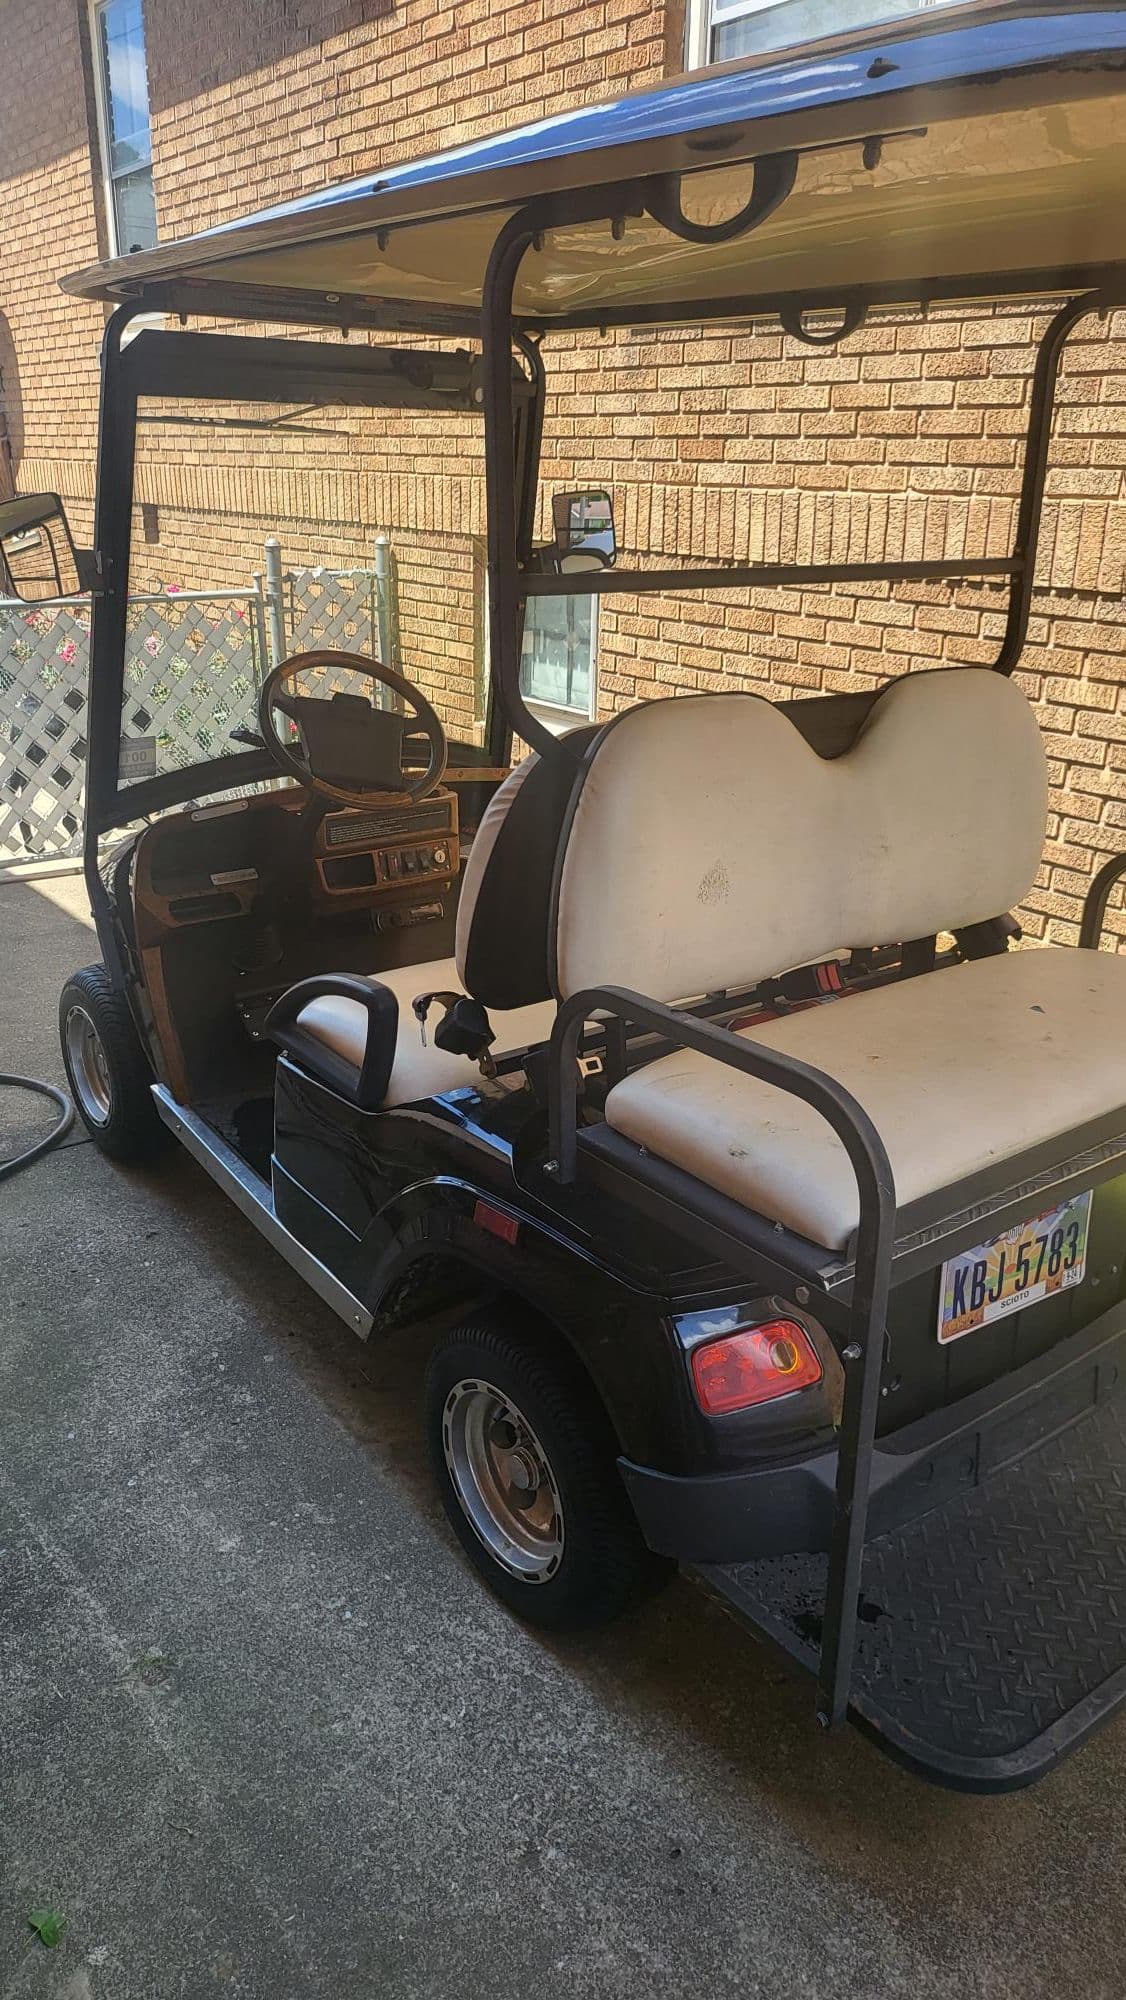 2009 Porsche 911 - 2009 Zone Electric Golf Cart price for quick sale - Used - VIN 1GC4YNEY2NF138570 - Portsmouth, OH 45662, United States